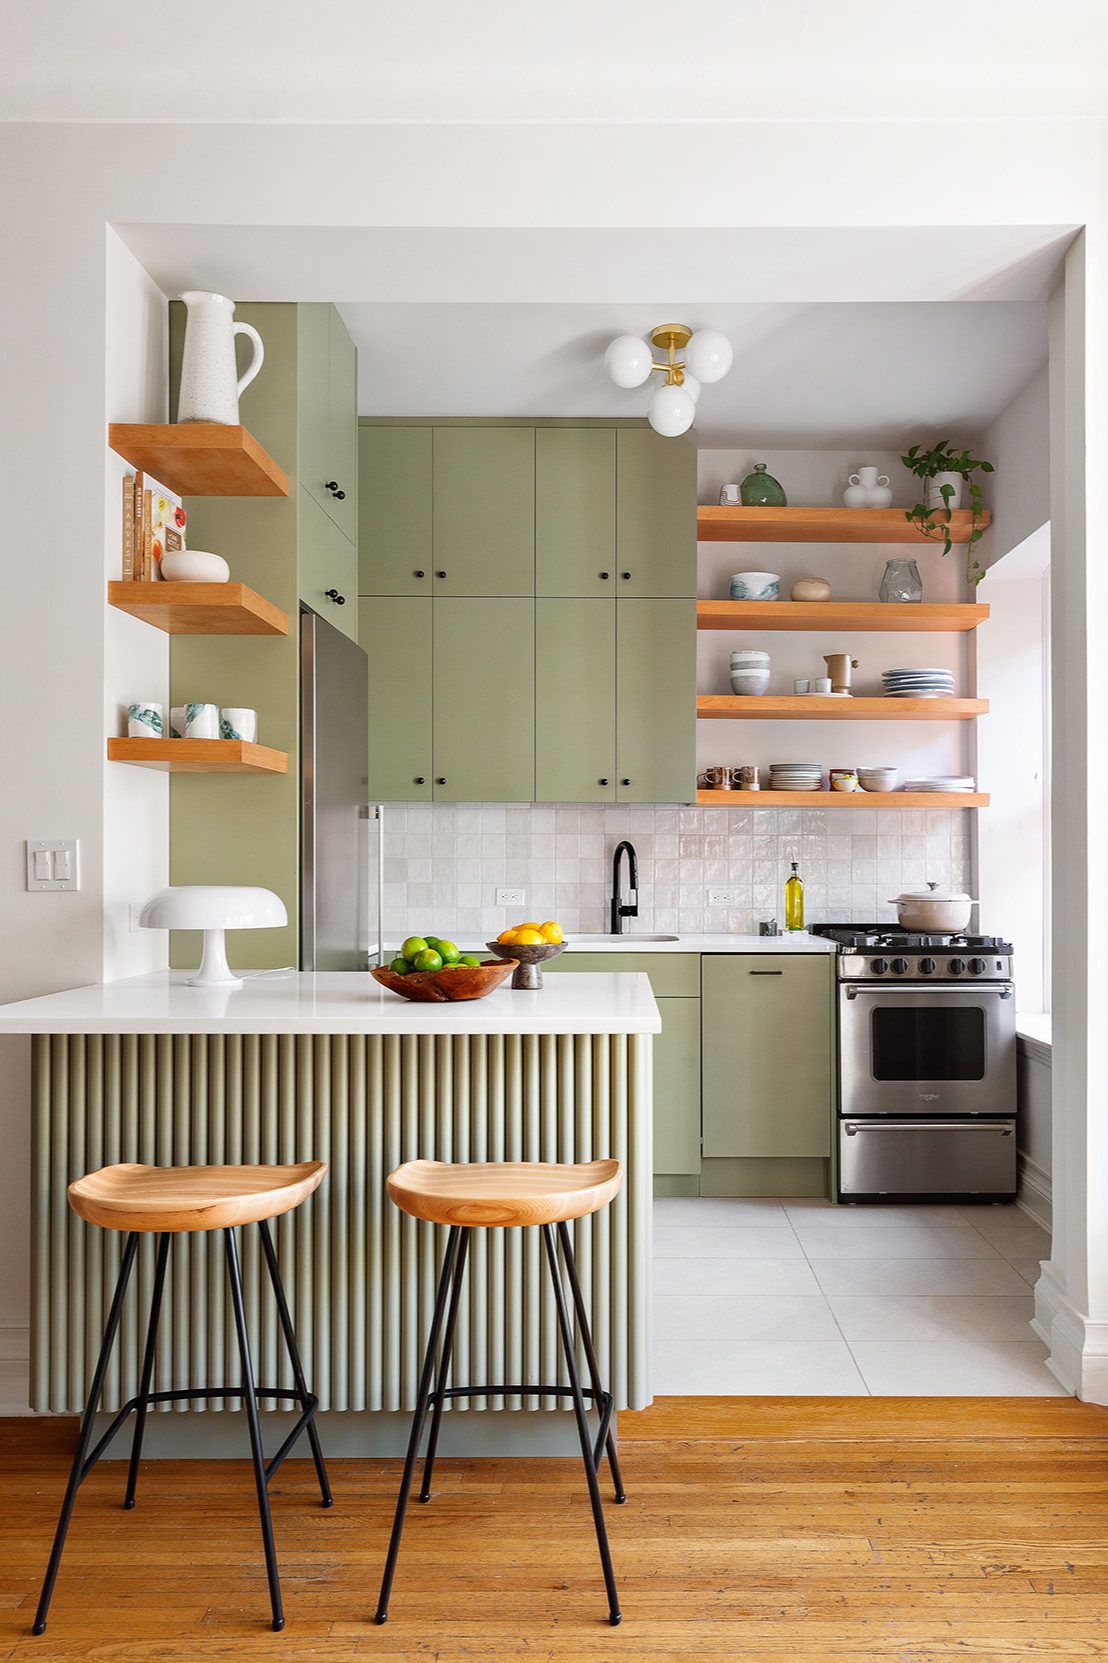 Maximizing Space: Innovative Small
Kitchen Design Ideas for Modern Living